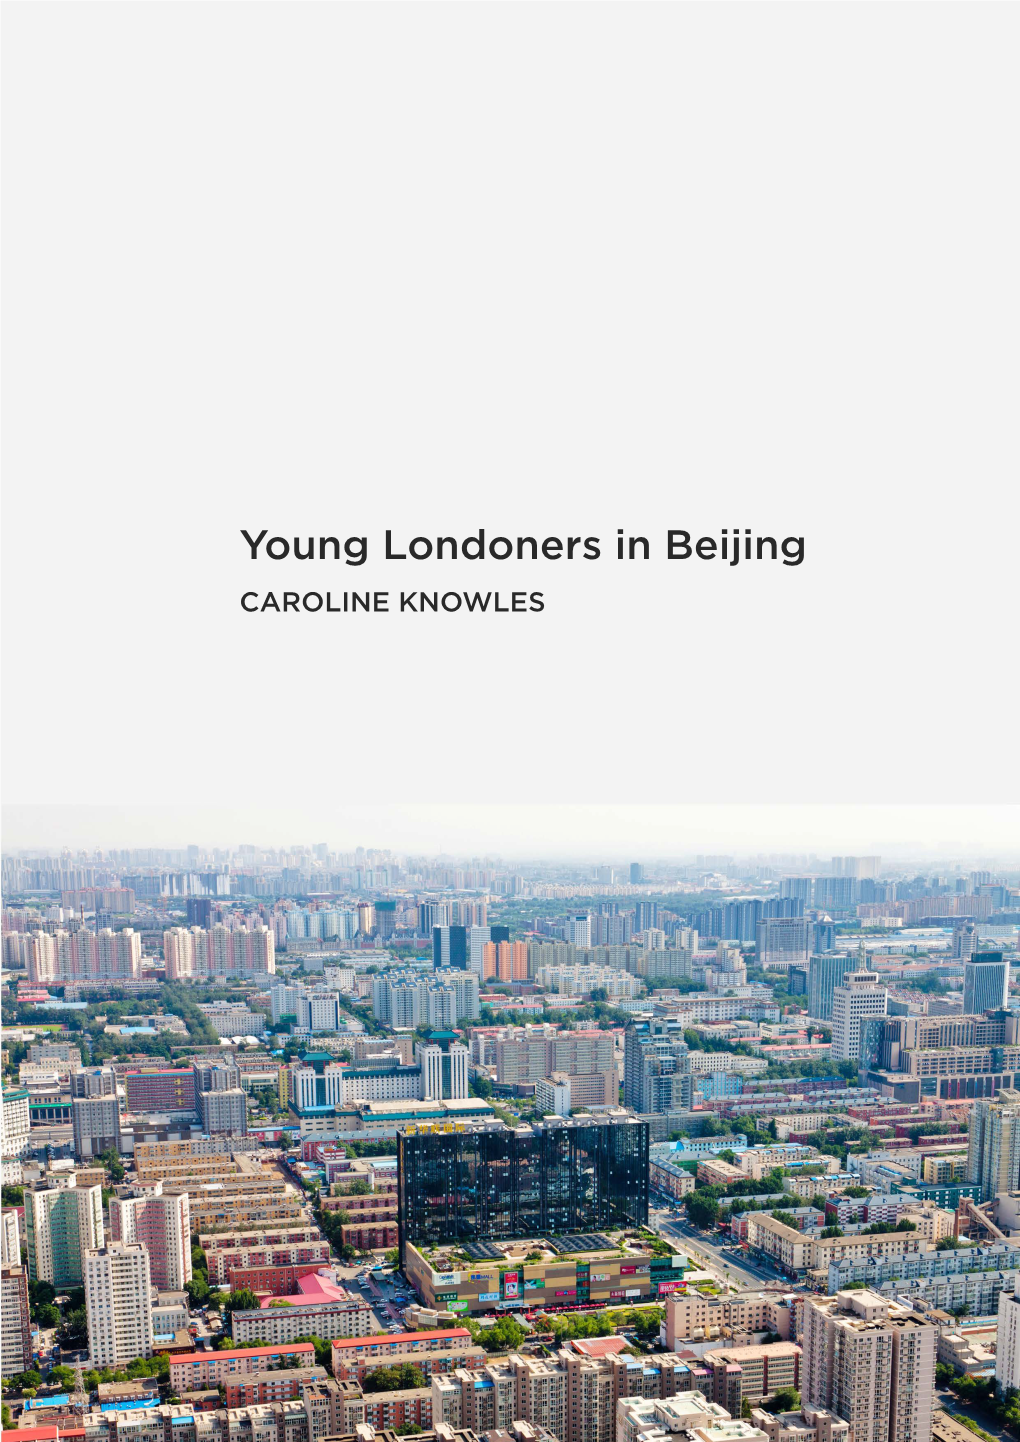 Young Londoners in Beijing CAROLINE KNOWLES ABOUT the AUTHOR